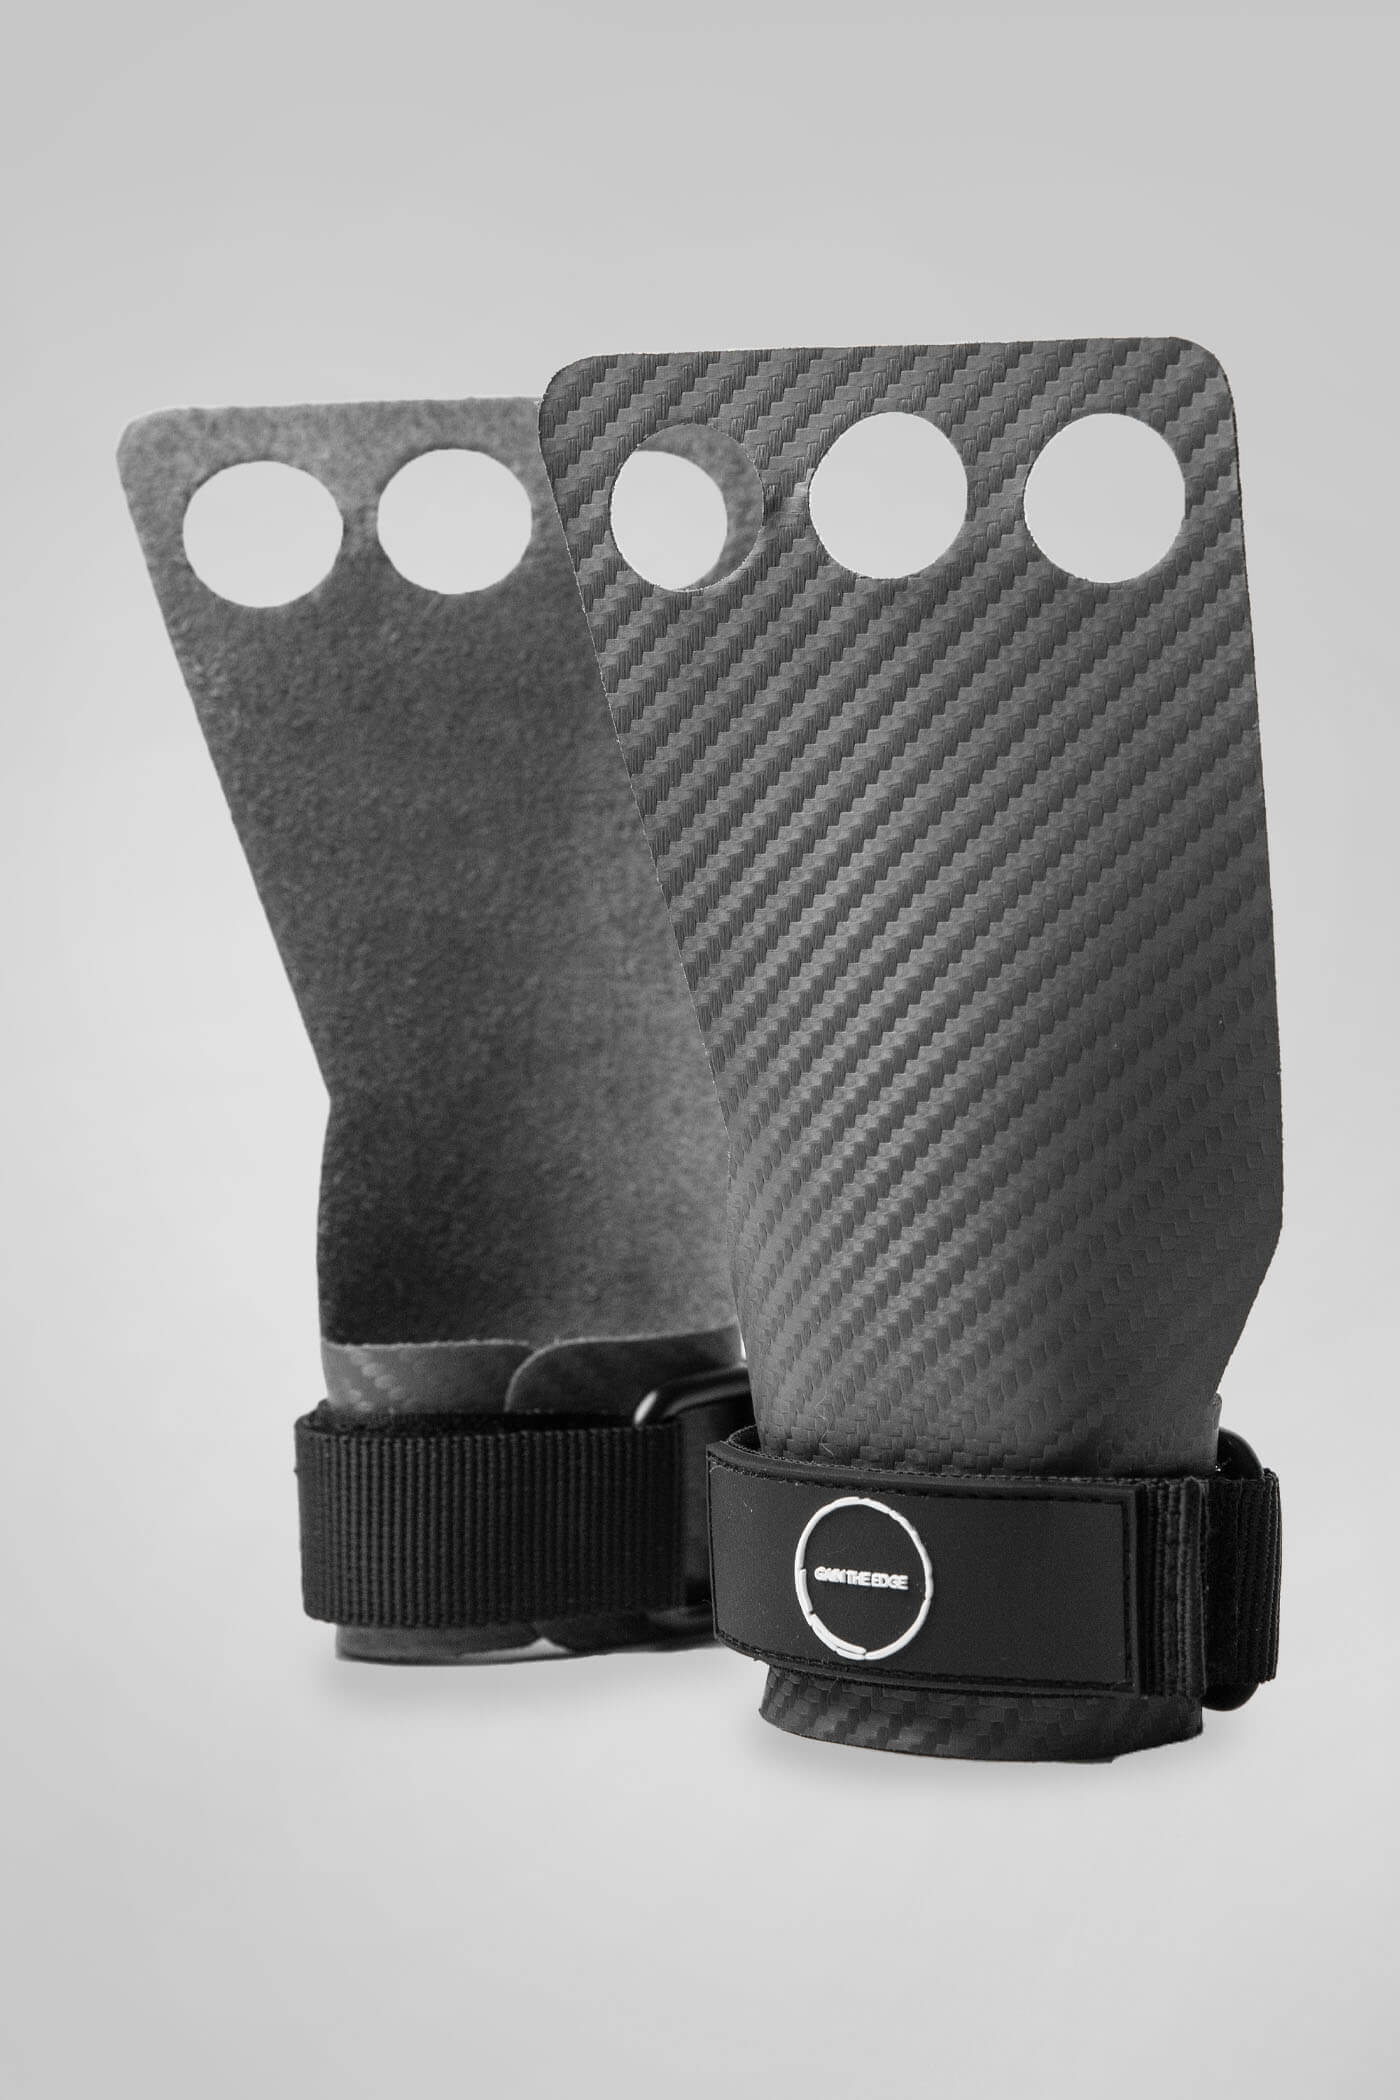 Hand Grips for Gym & Crossfit - Gain The Edge Official